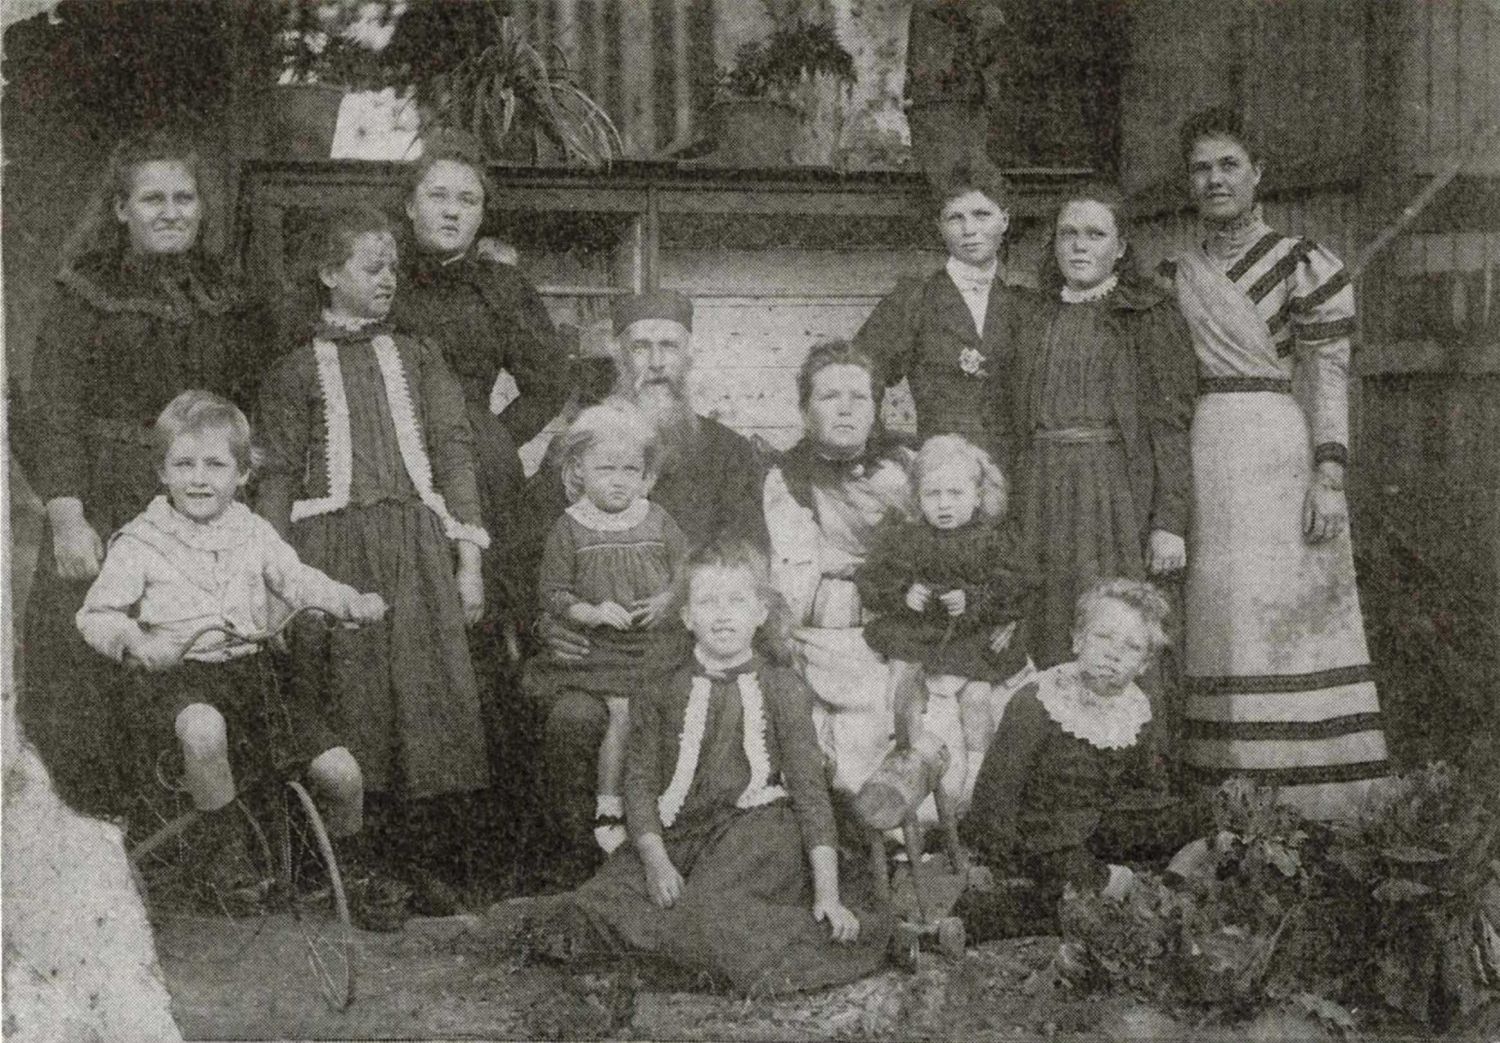 Black and white image of a group of men, women and children.